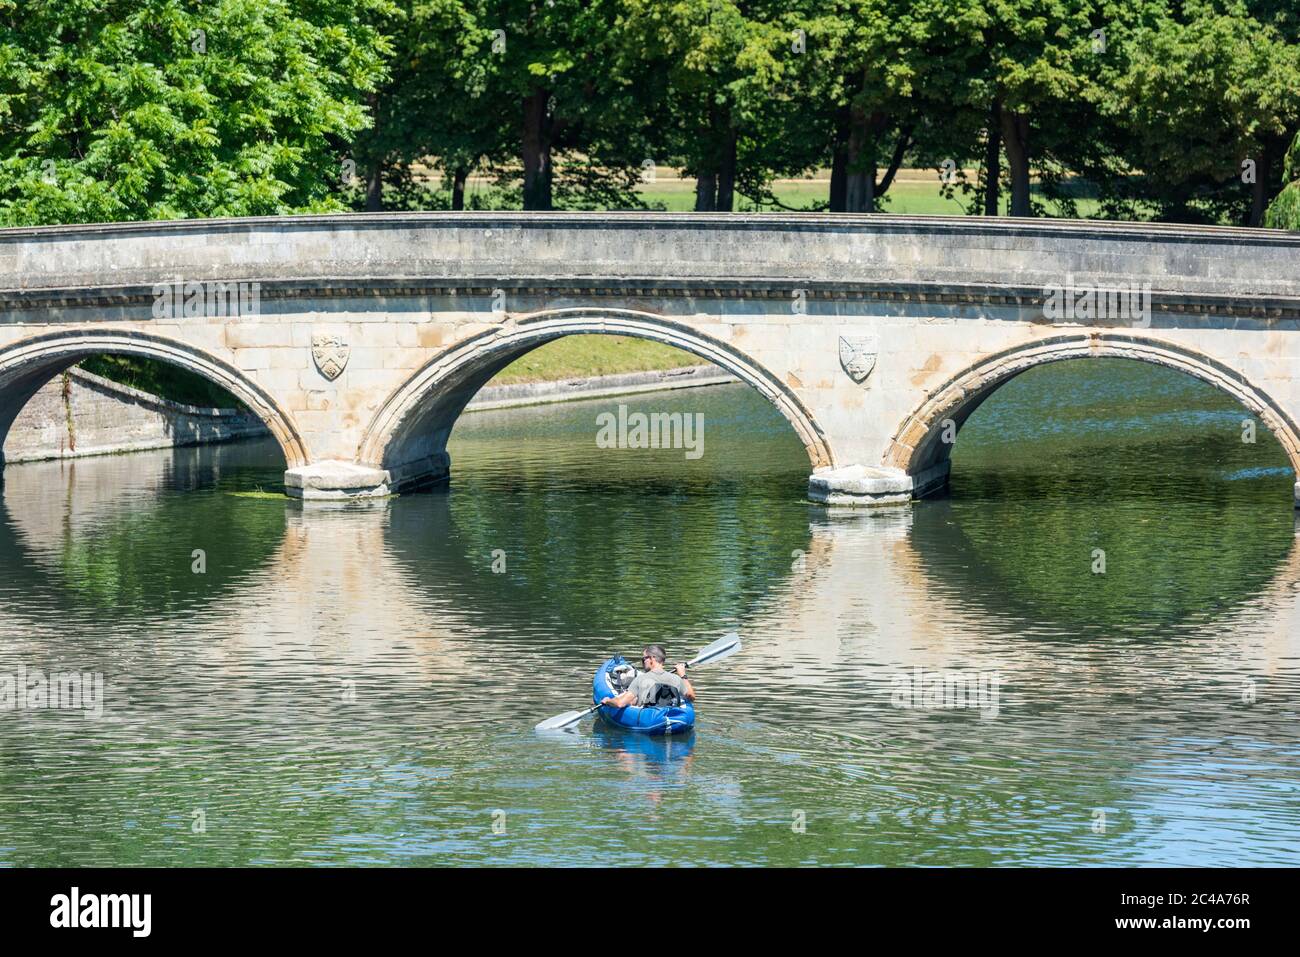 Cambridge, UK. 25th June, 2020. A man enjoys the heatwave in a kayak on the River Cam as temperatures rise above 30 degrees centigrade. The river is very quiet due to the shutting of most punting companies during the coronavirus lockdown. There are also warnings of high ultraviolet violet rays in the less polluted summer weather. Credit: Julian Eales/Alamy Live News Stock Photo